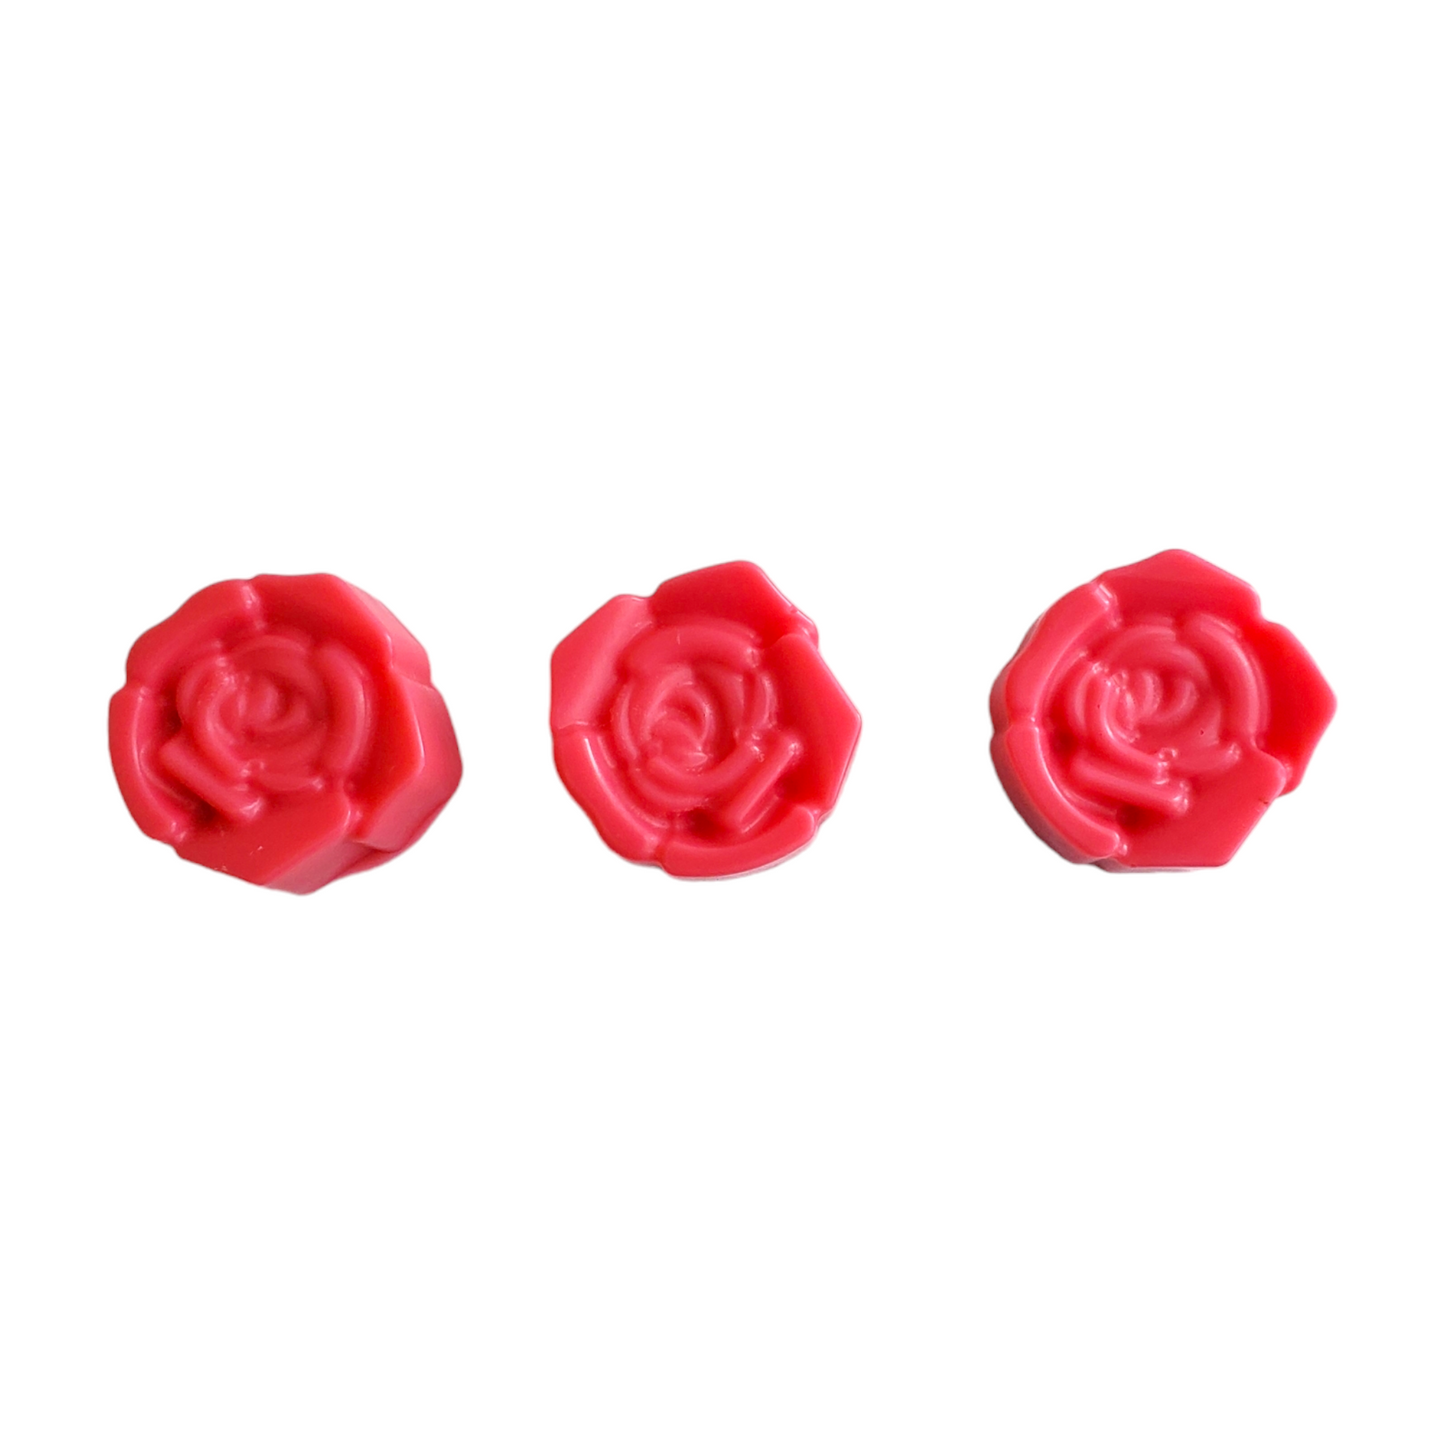 Rose Garden Soy Wax Melts - Signature Collection